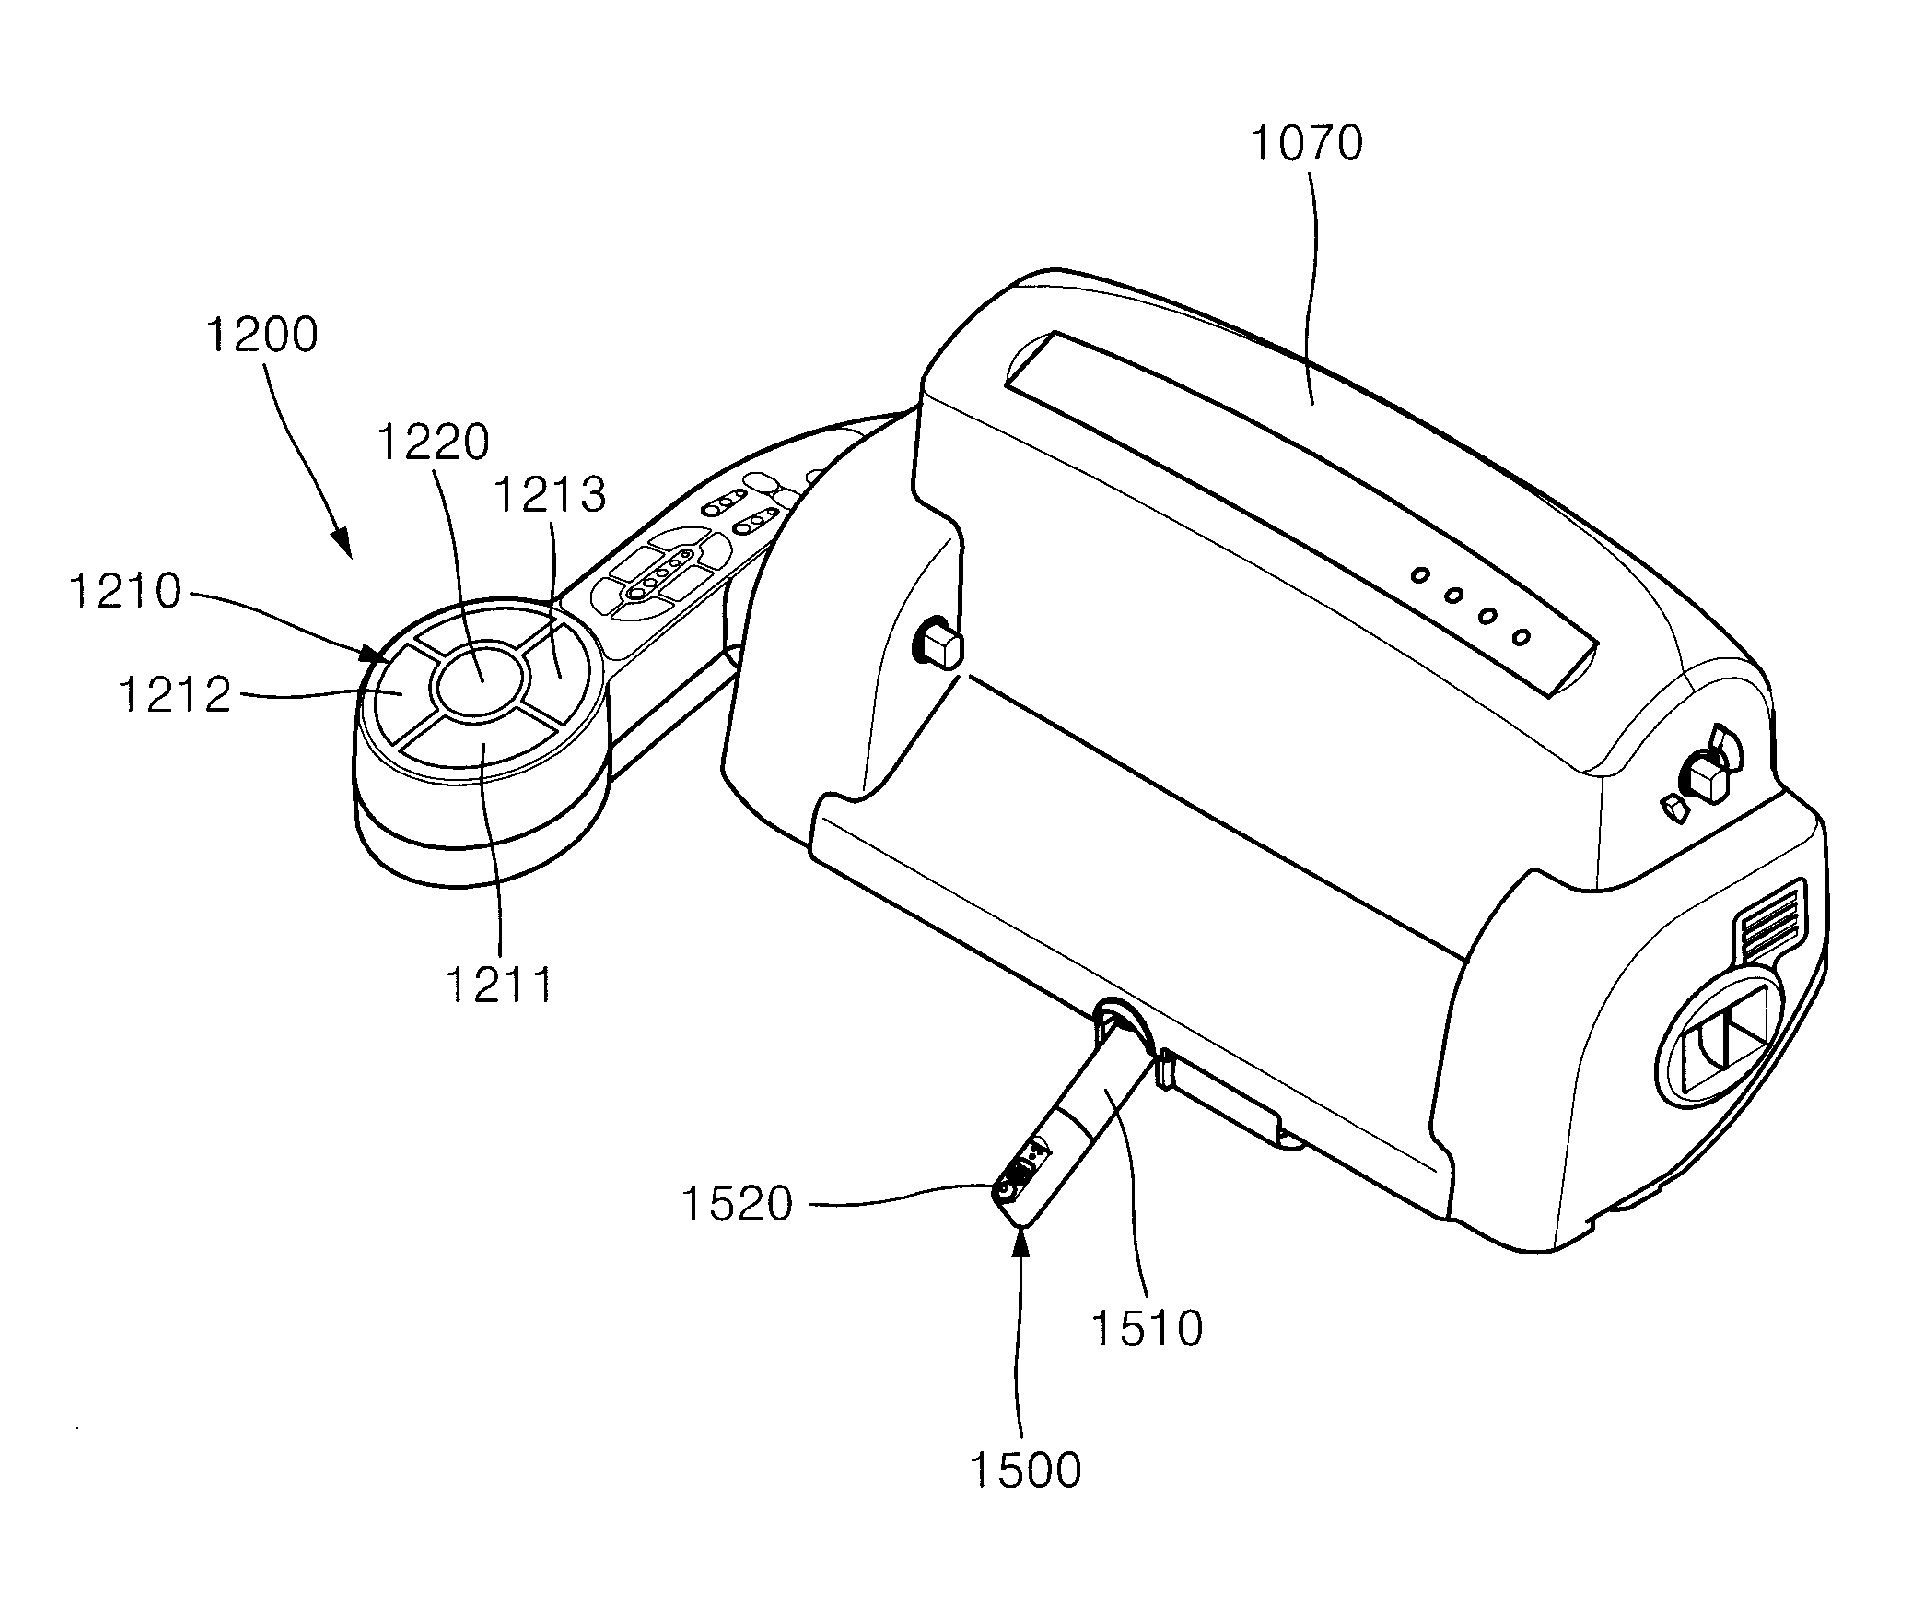 Spray nozzle structure for a bidet having an enema function